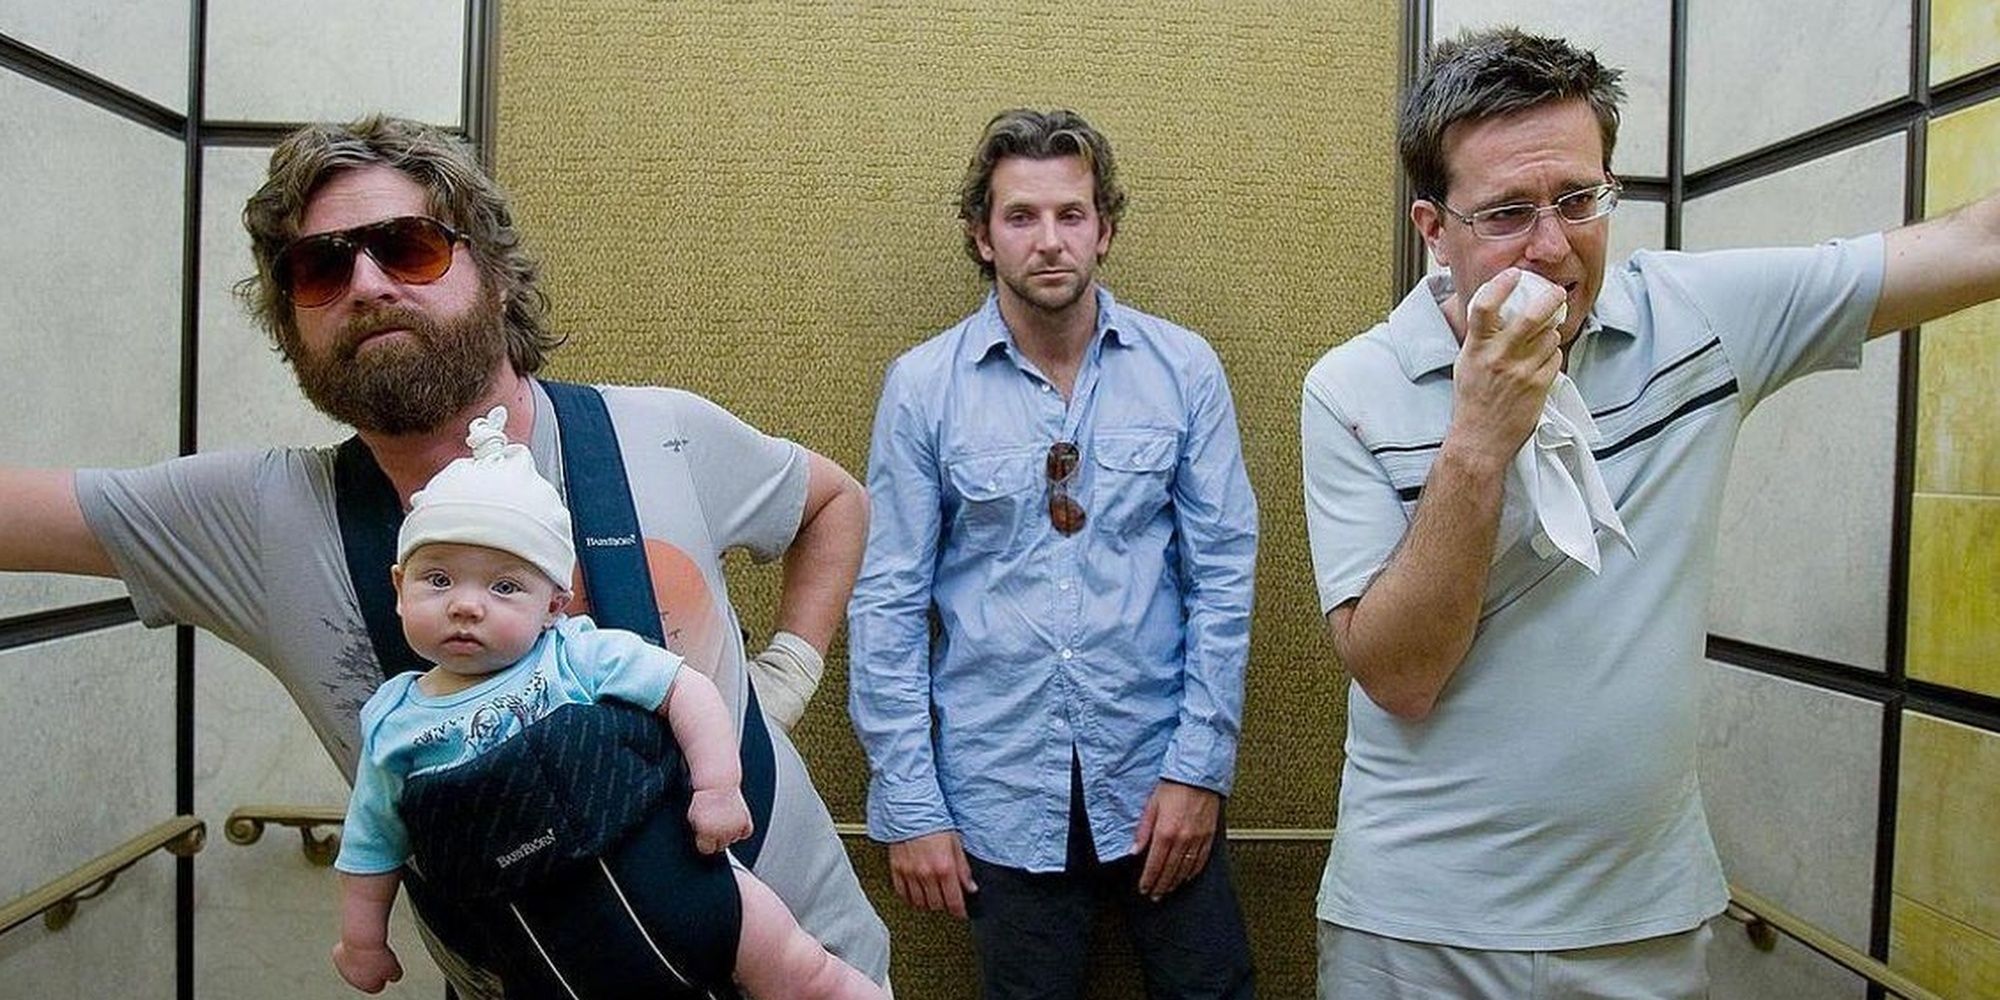 Three men look horrified while riding in an elevator in The Hangover.